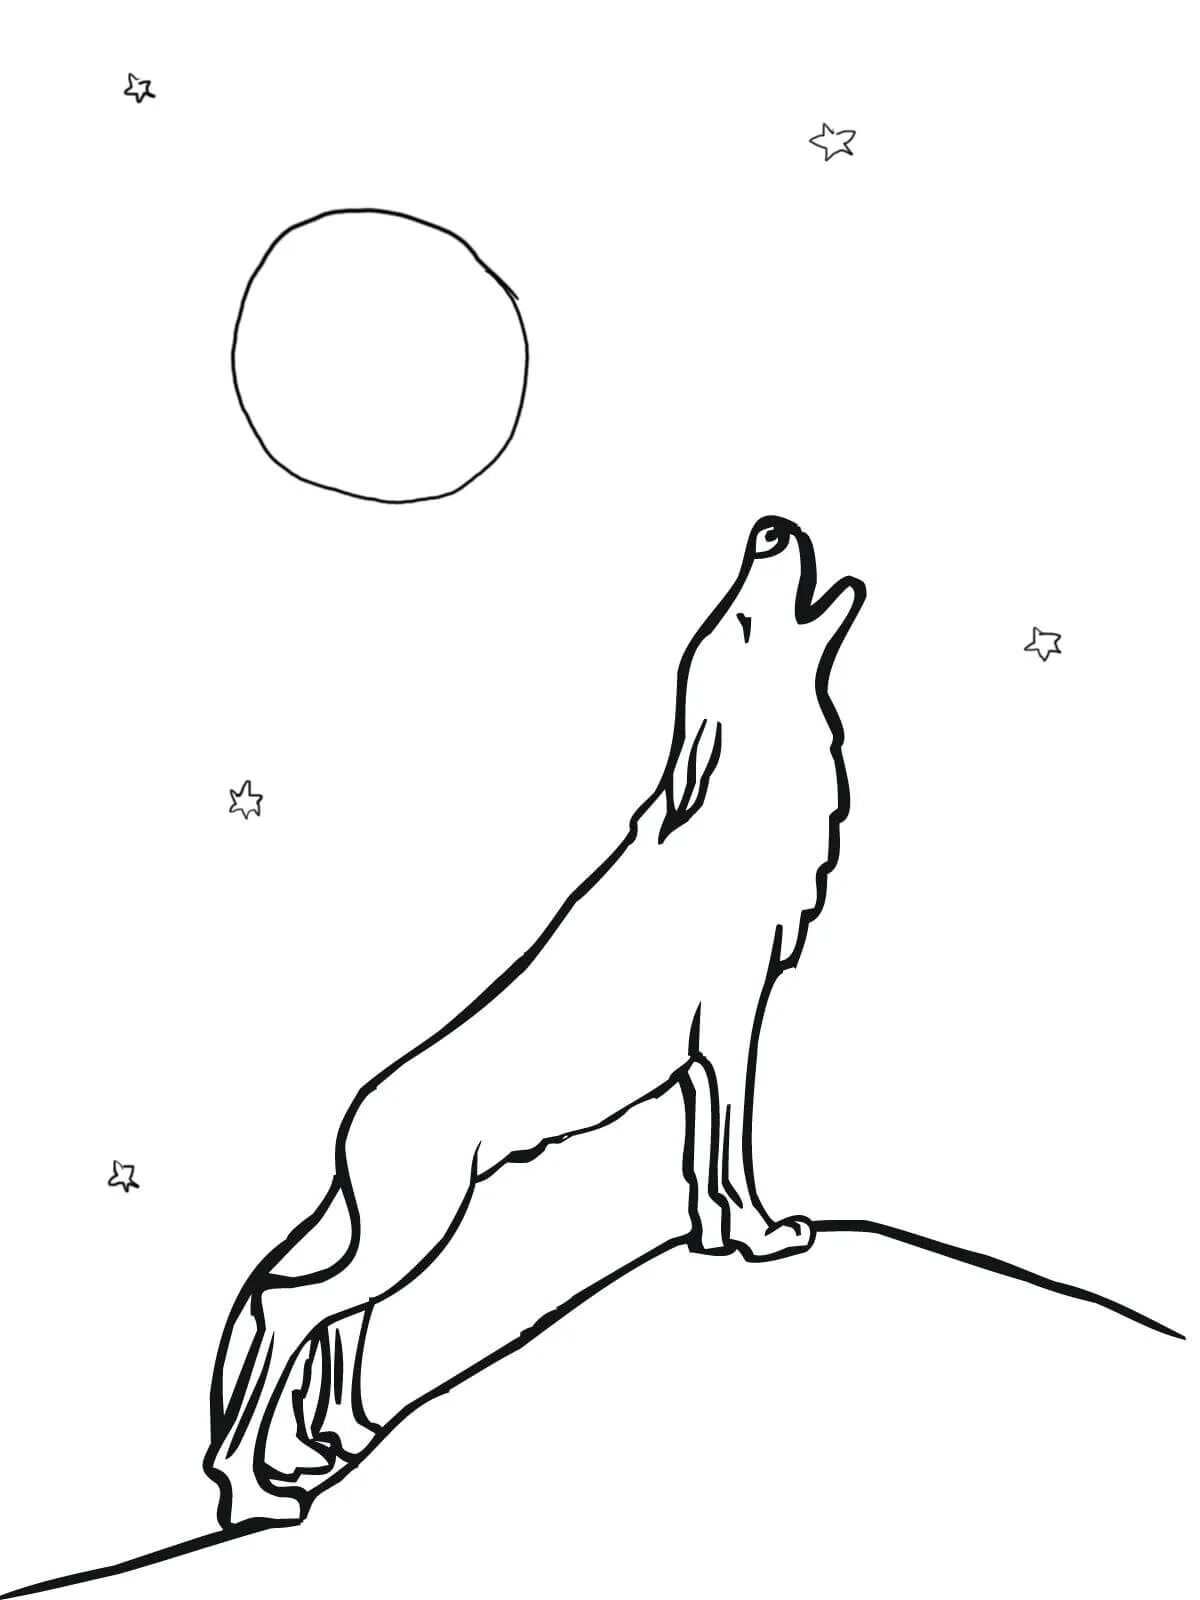 Wolf howling at the moon #12